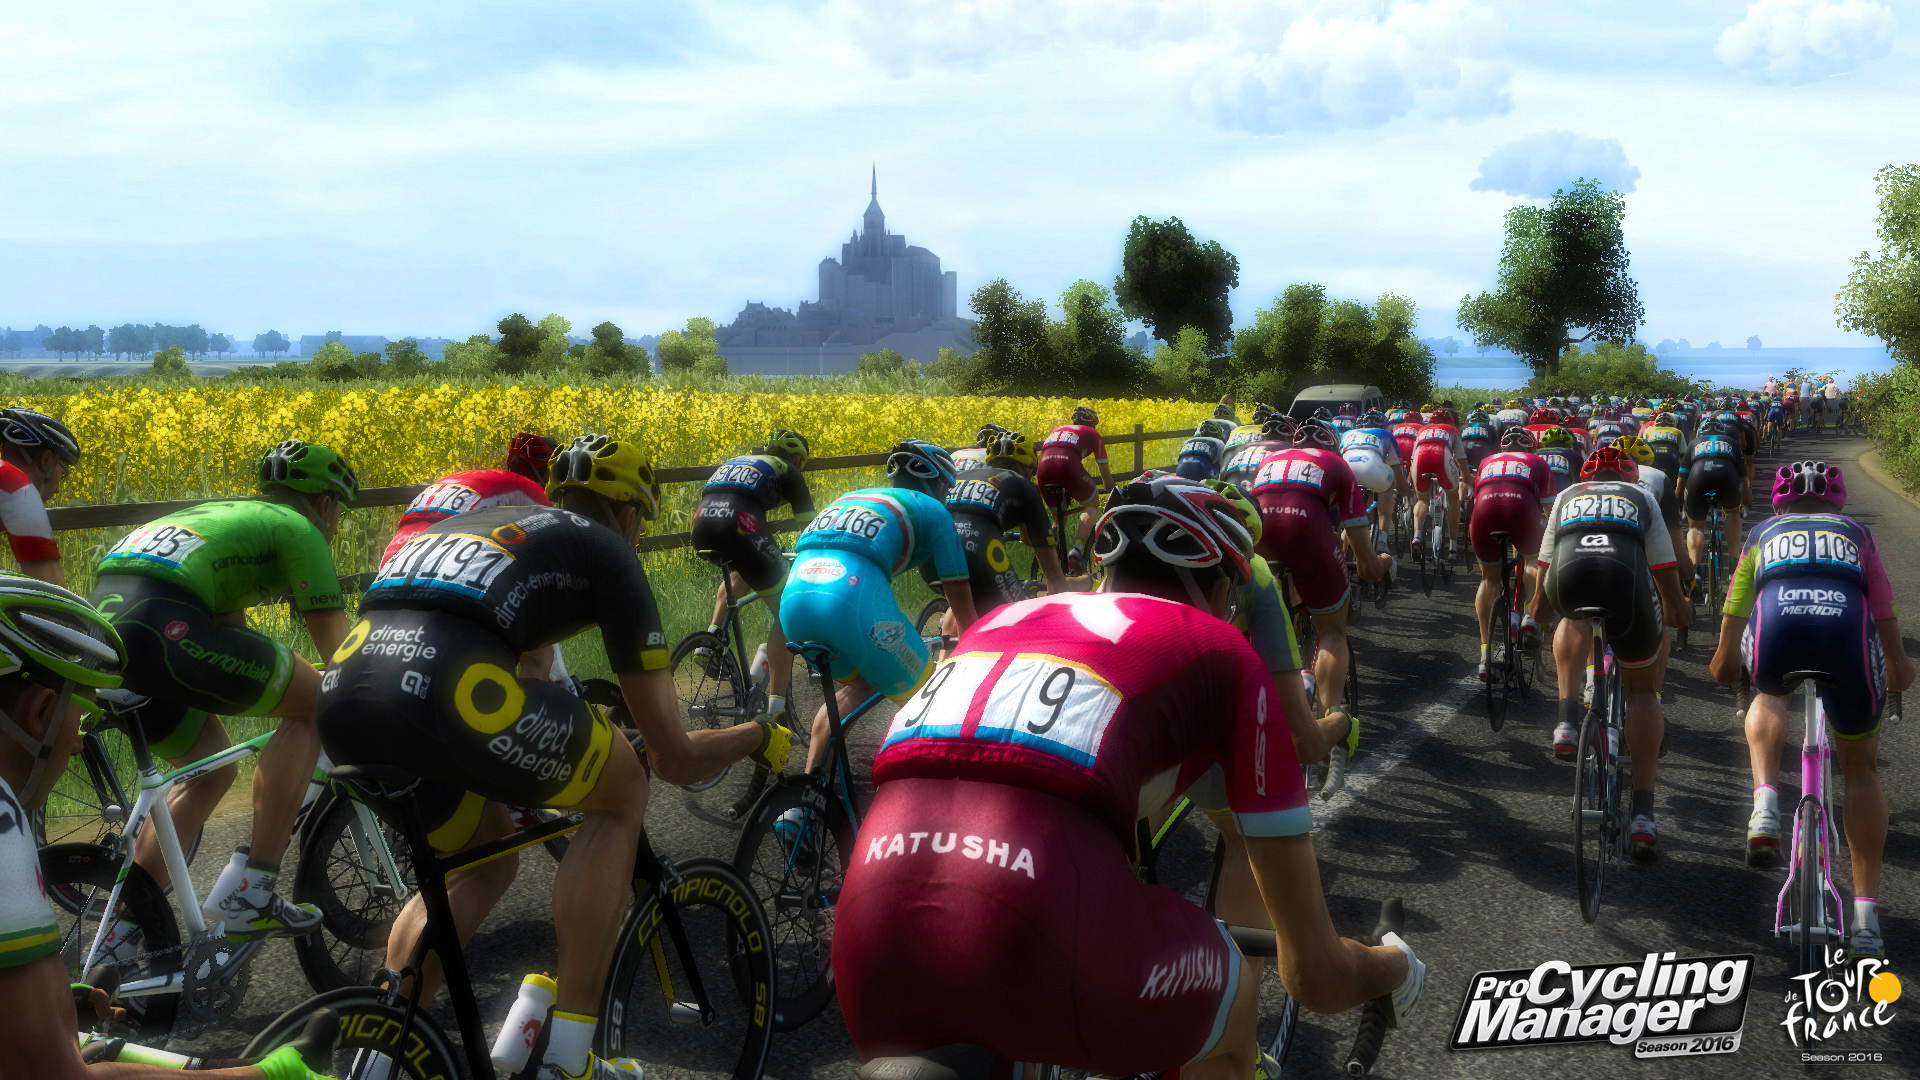 Angreb skipper kutter Save 90% on Pro Cycling Manager 2016 on Steam